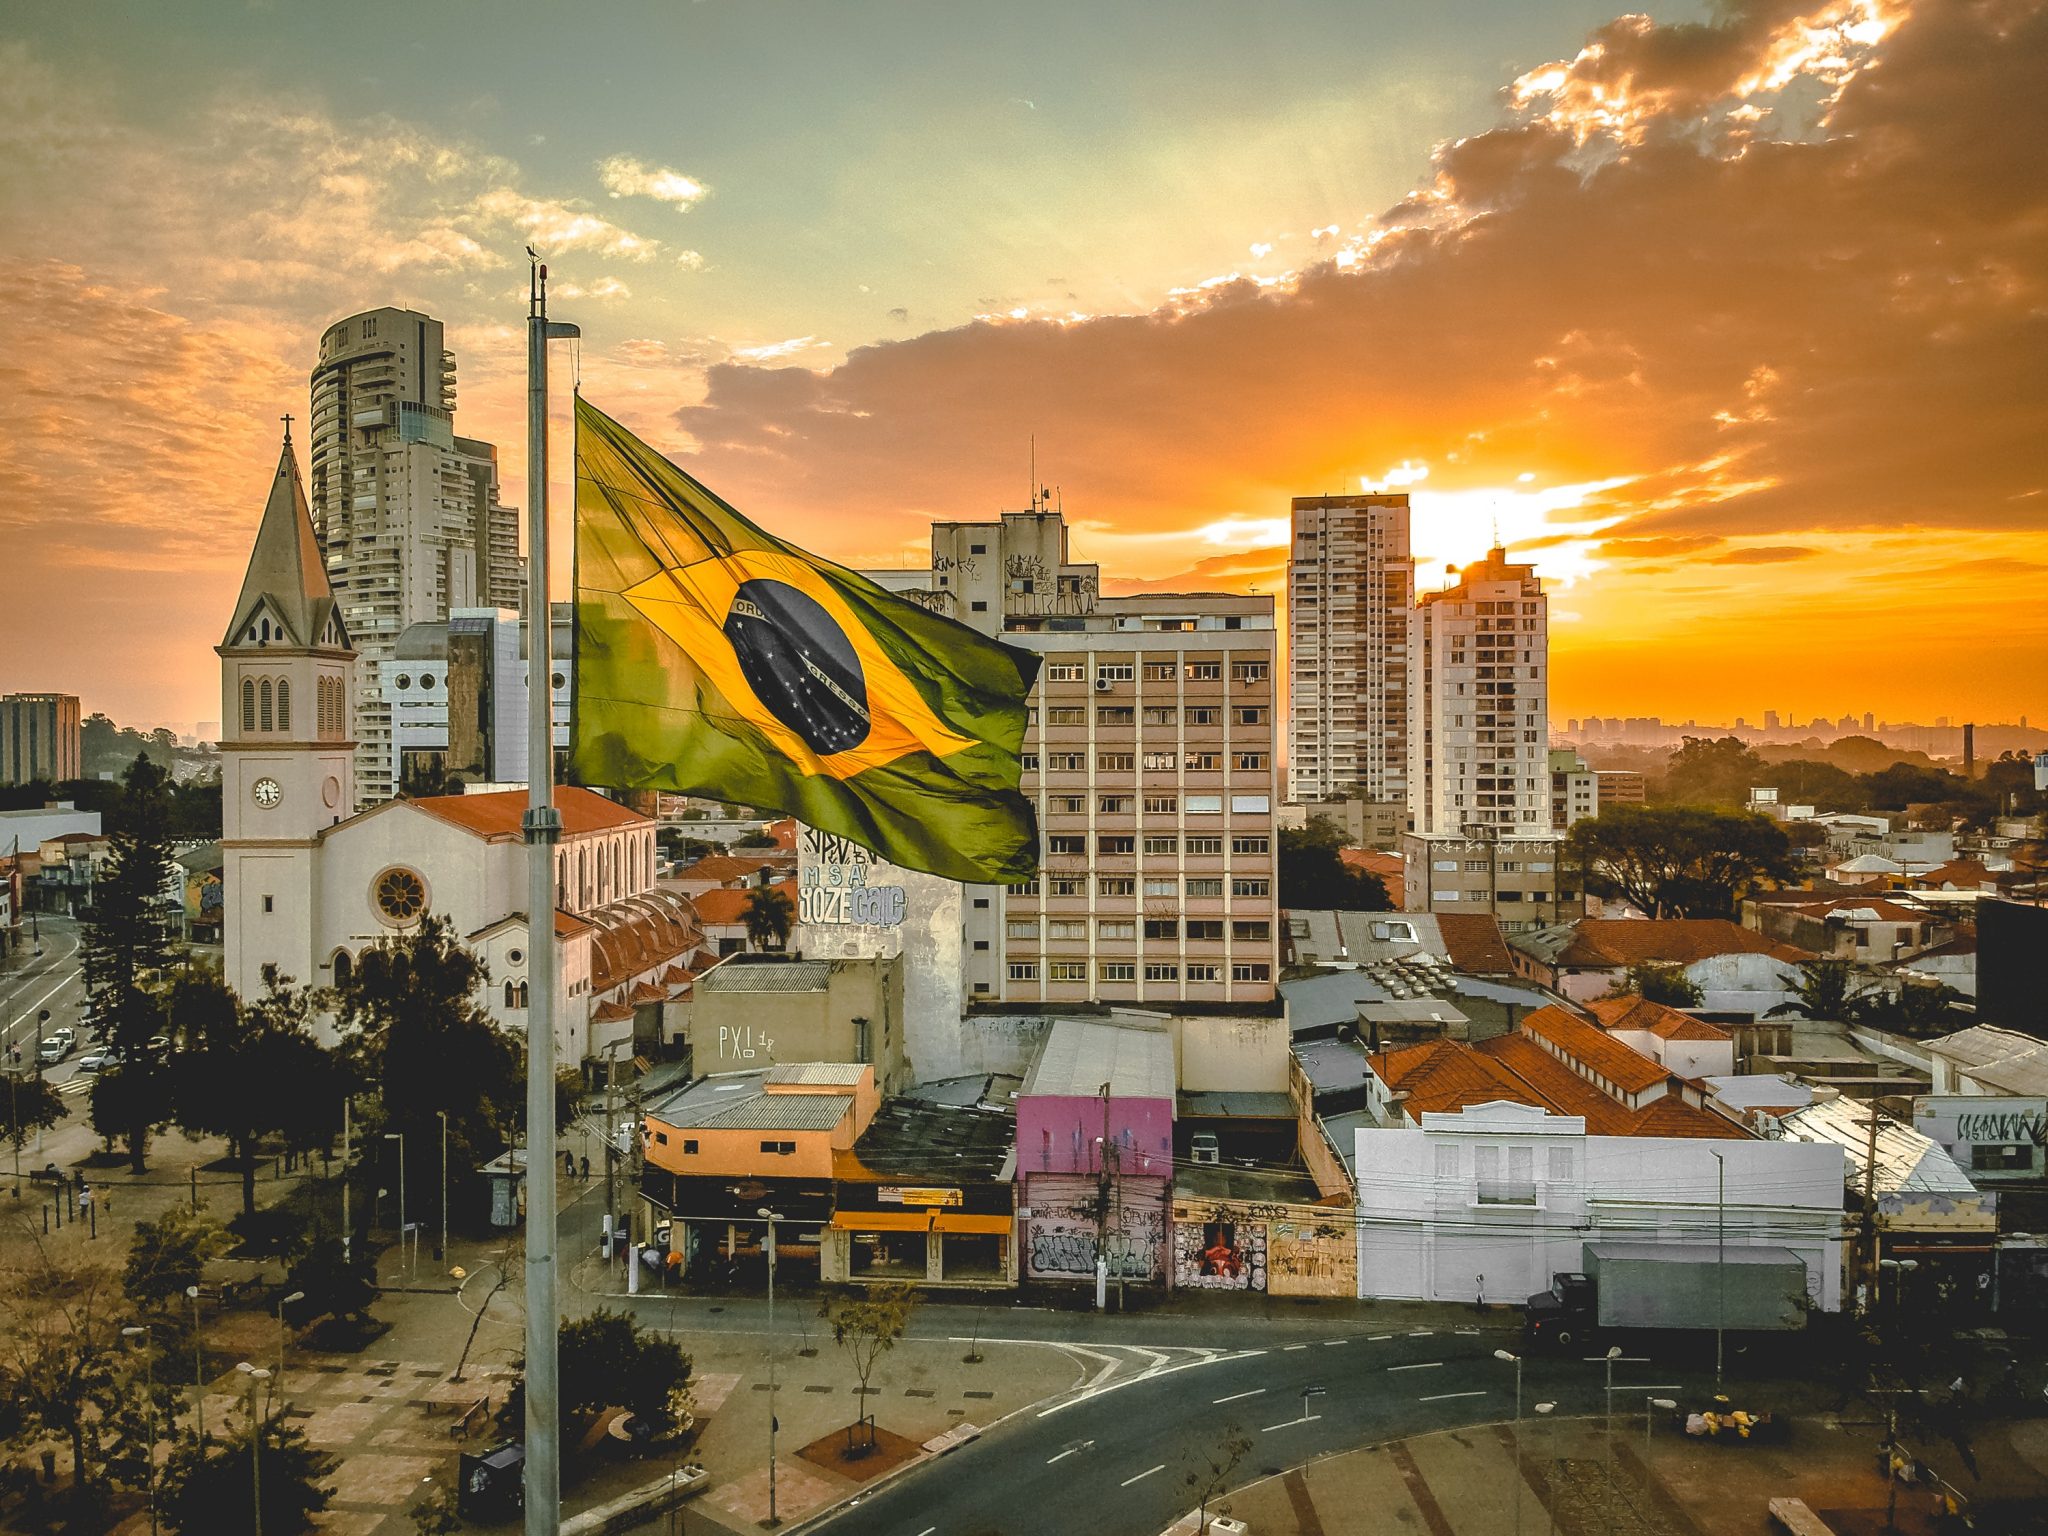 Should Google pay for news in Brazil? It’s complicated